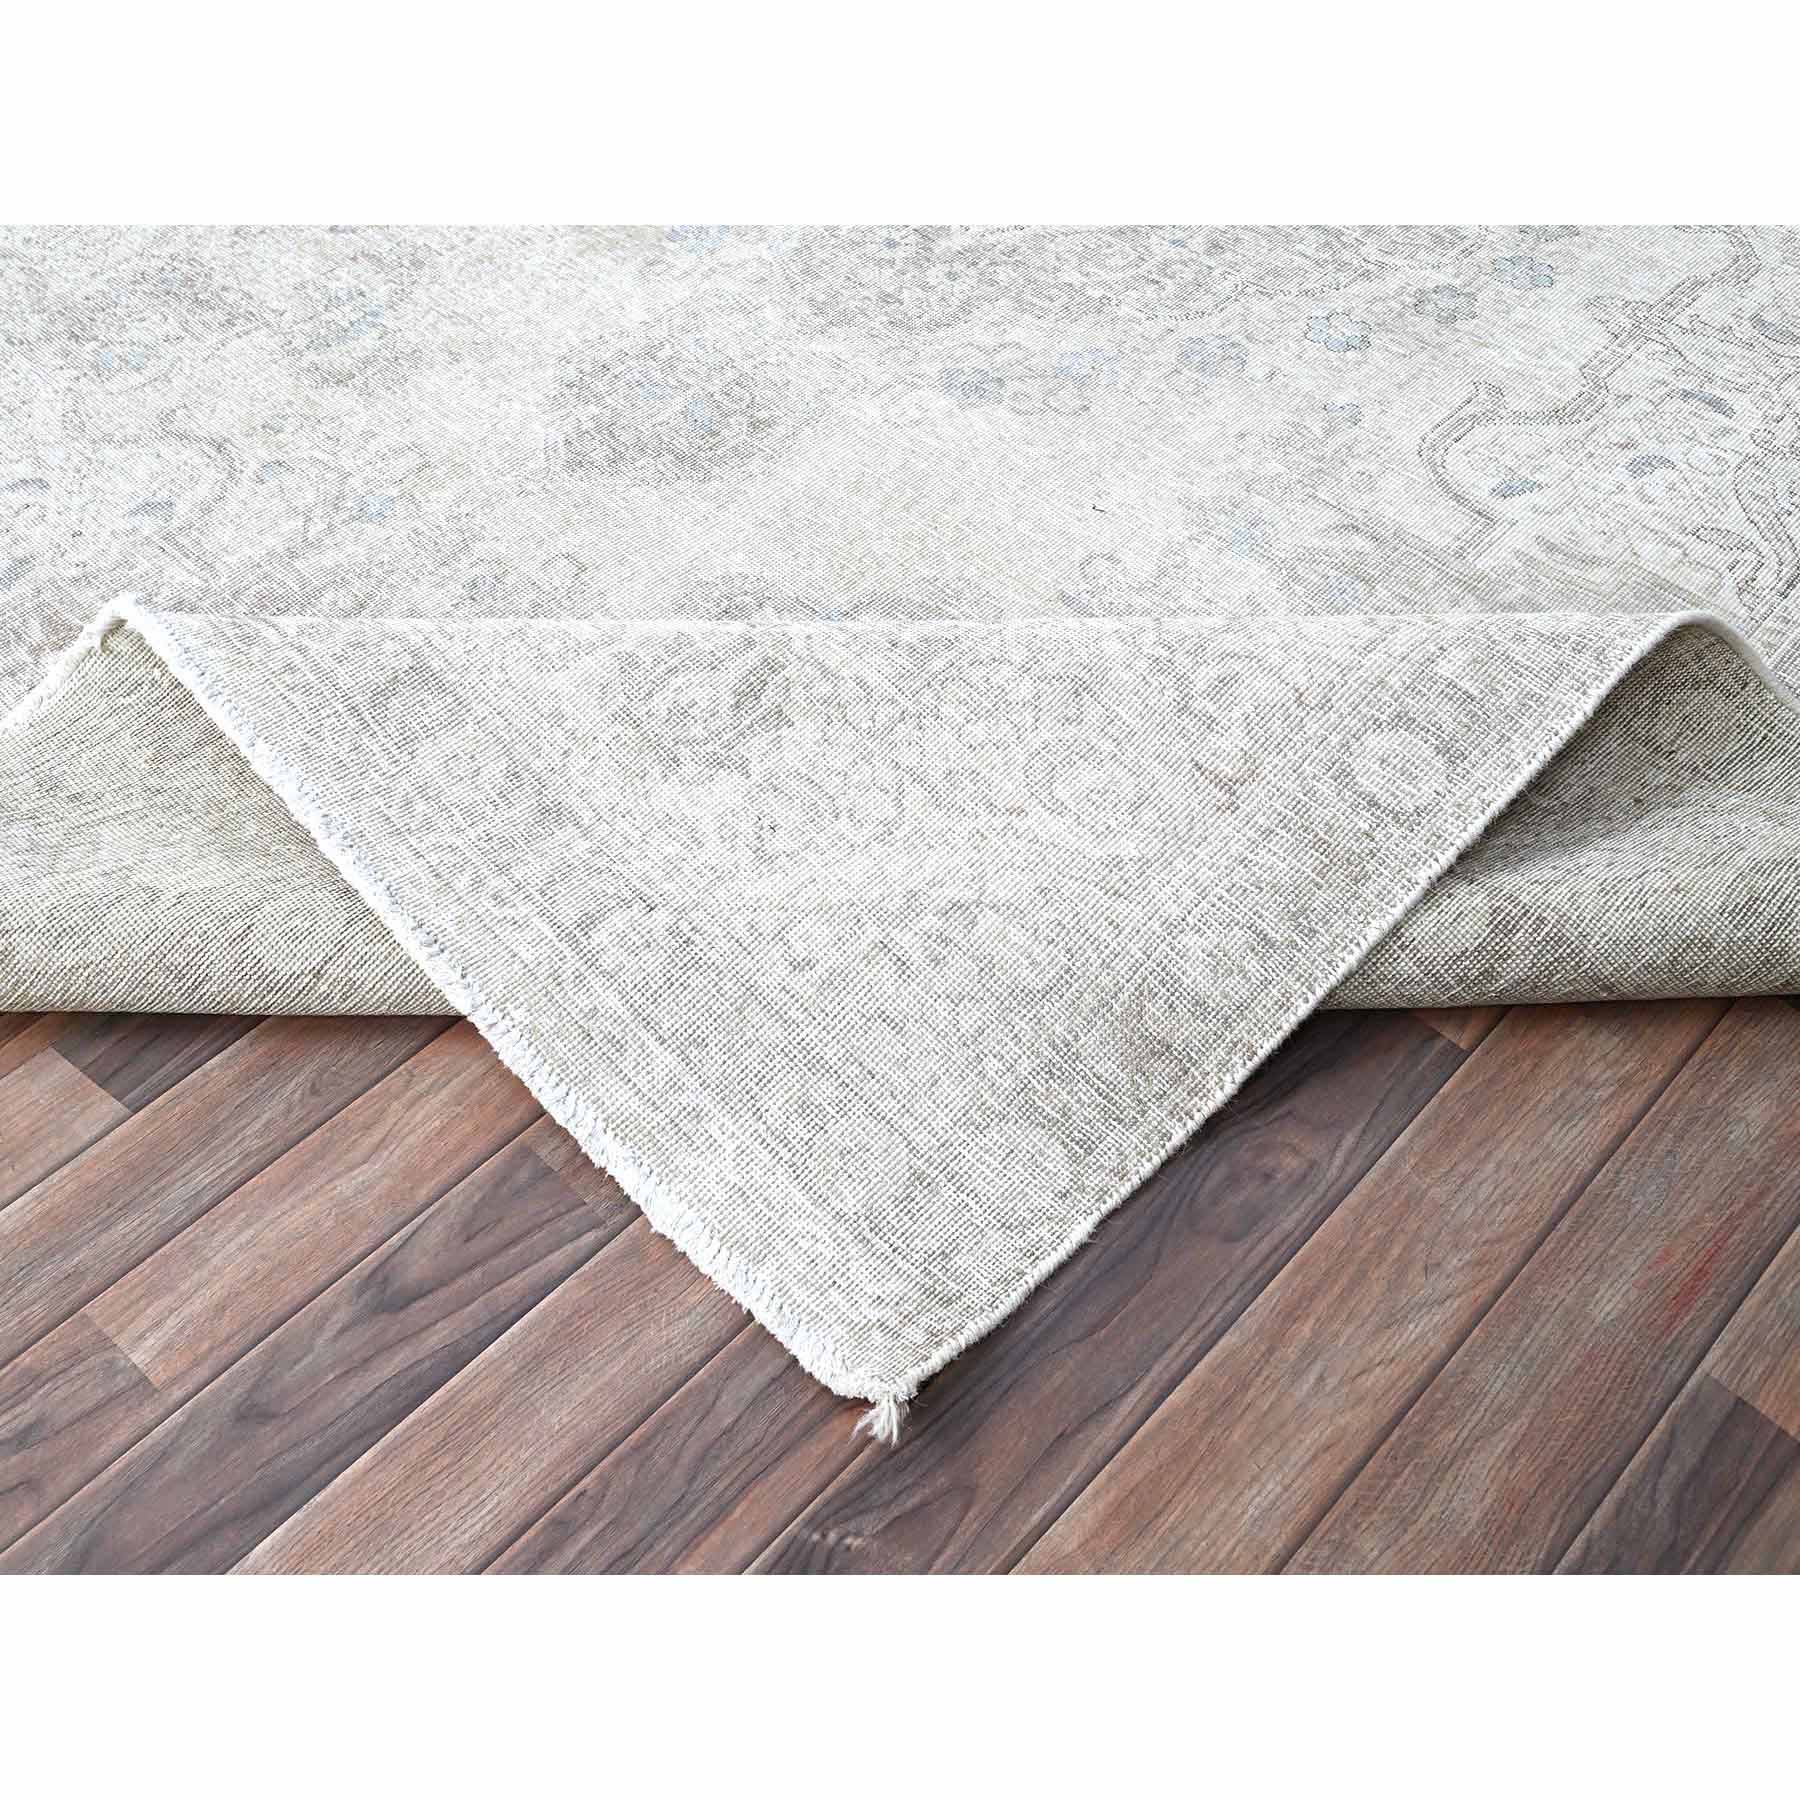 Overdyed-Vintage-Hand-Knotted-Rug-430575